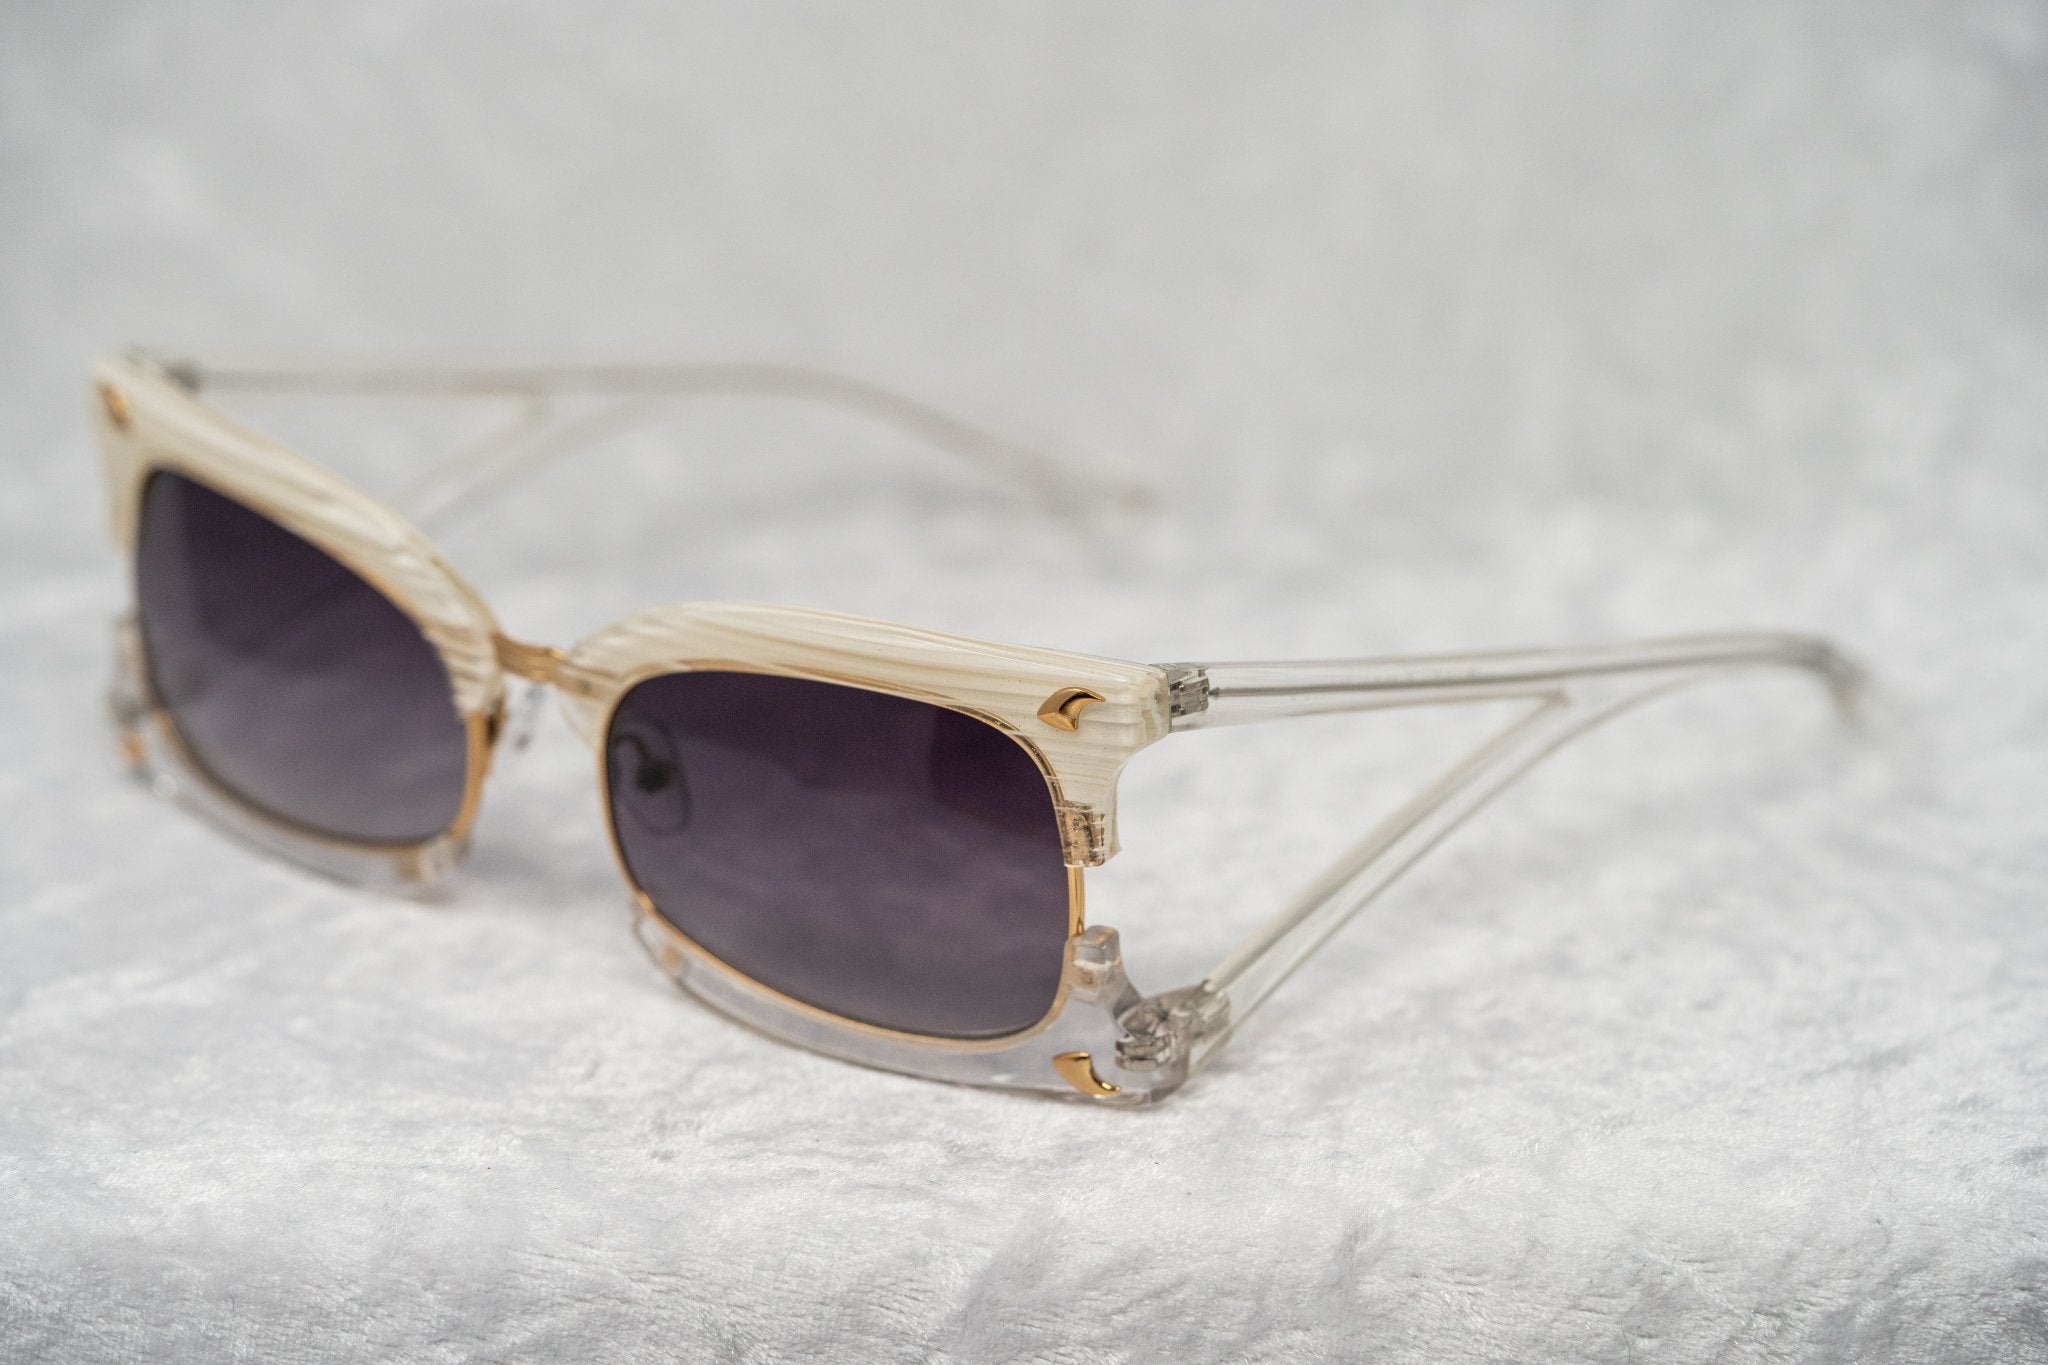 Prabal Gurung Sunglasses Rectangular Textural White With Purple Category 3 Graduated Lenses PG2C2SUN - Watches & Crystals